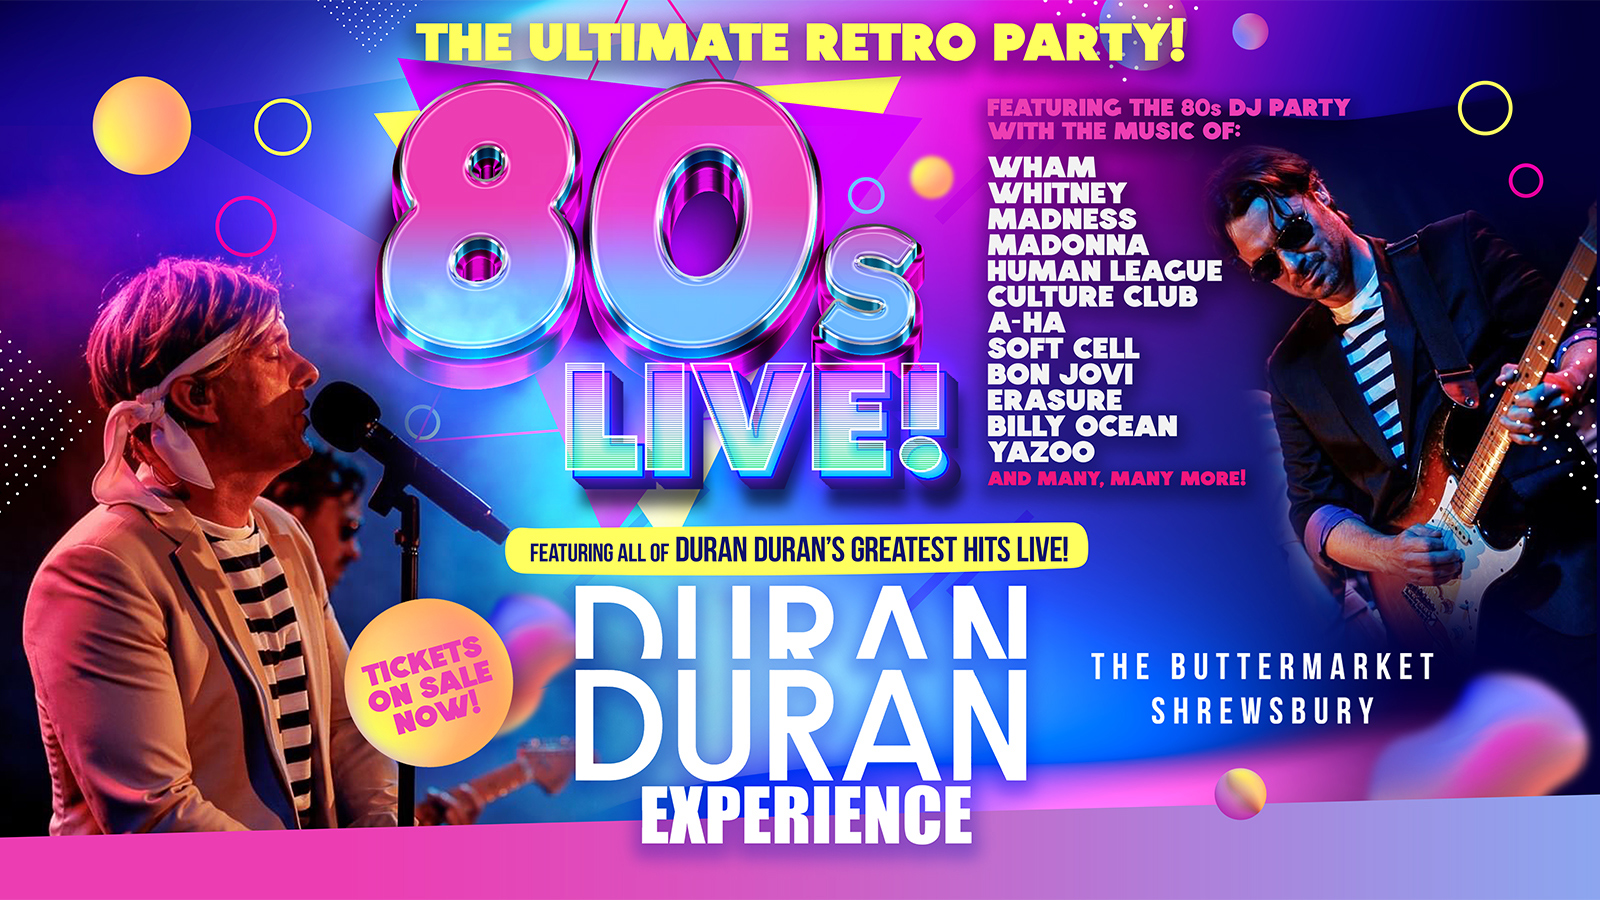 BIG 80s LIVE ft DURAN DURAN’S Greatest Hits & 80s Party  – ft No.1 live tribute Duran Duran Experience